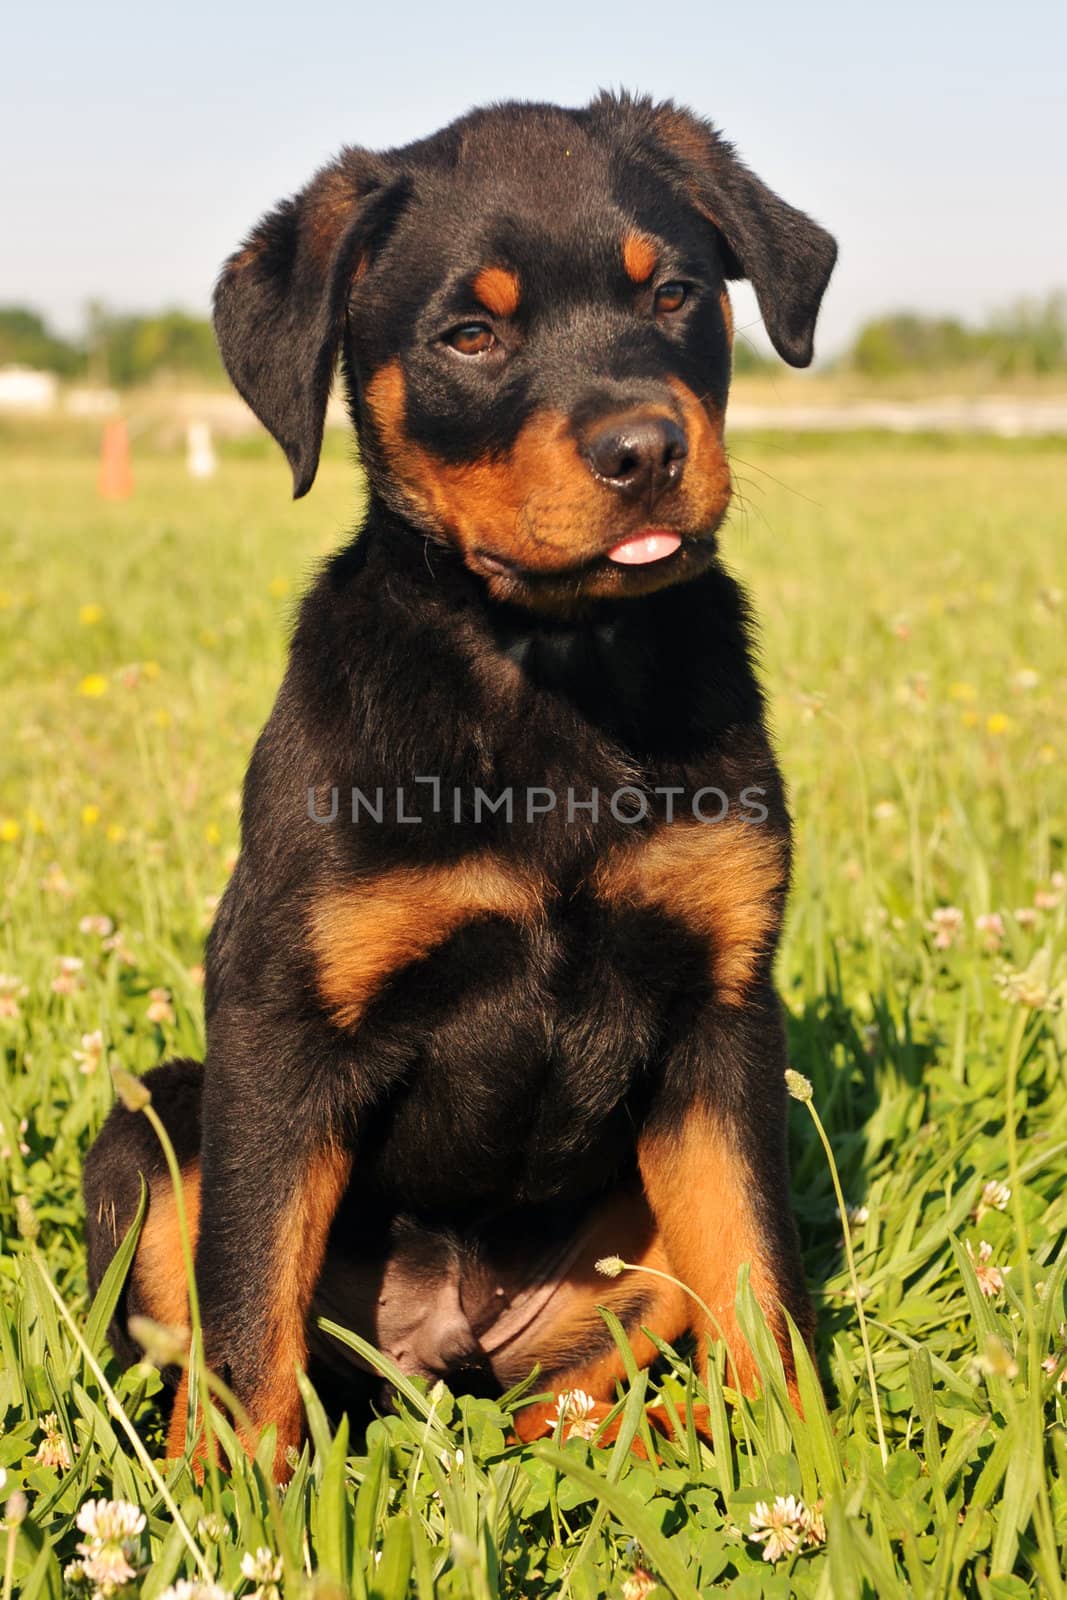 portrait of a purebred puppy rottweiler sitting in the grass